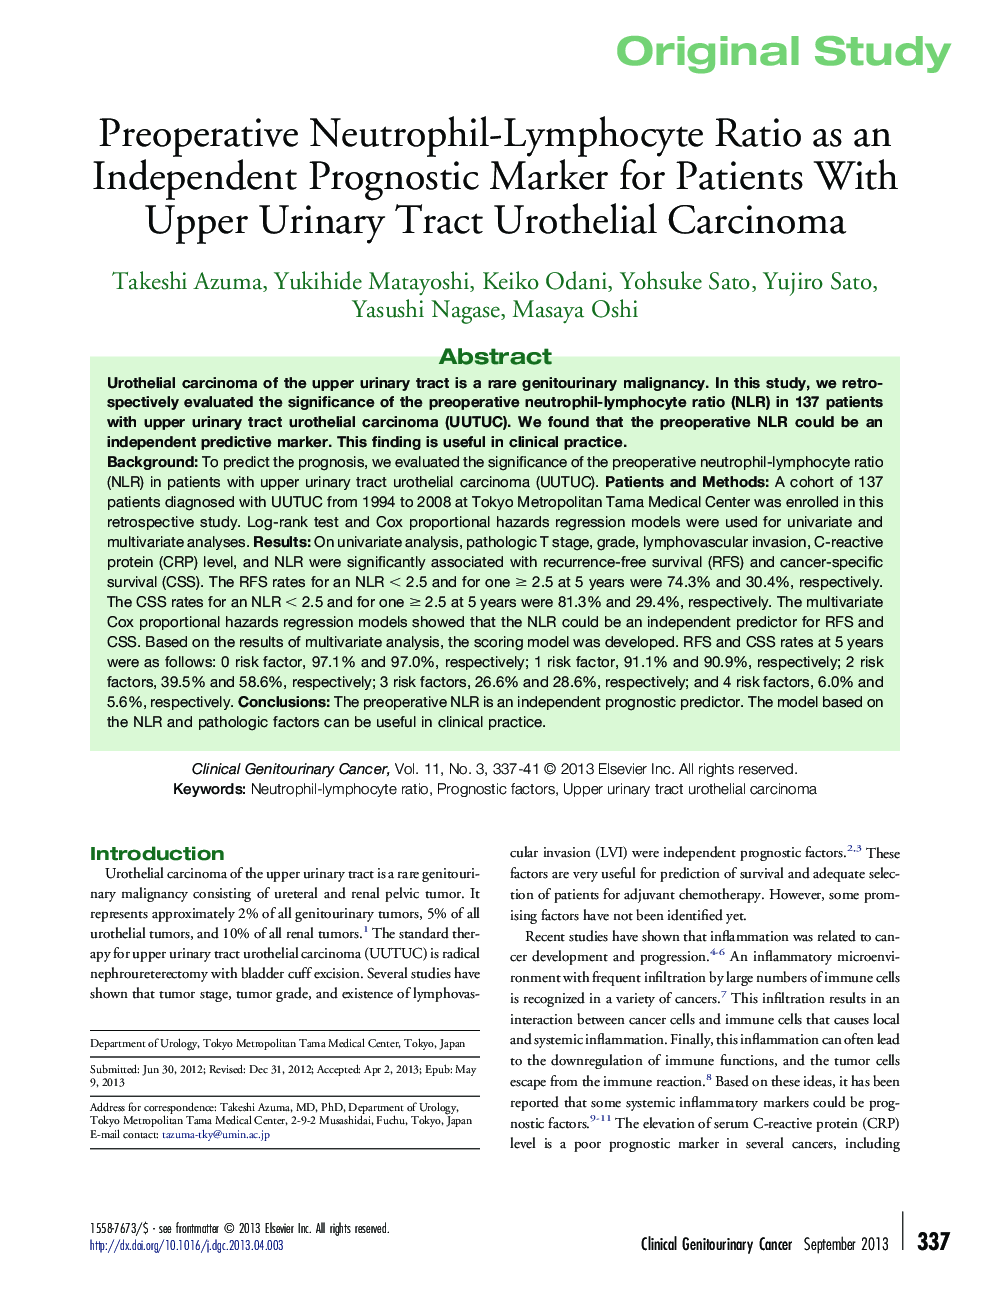 Preoperative Neutrophil-Lymphocyte Ratio as an Independent Prognostic Marker for Patients With Upper Urinary Tract Urothelial Carcinoma